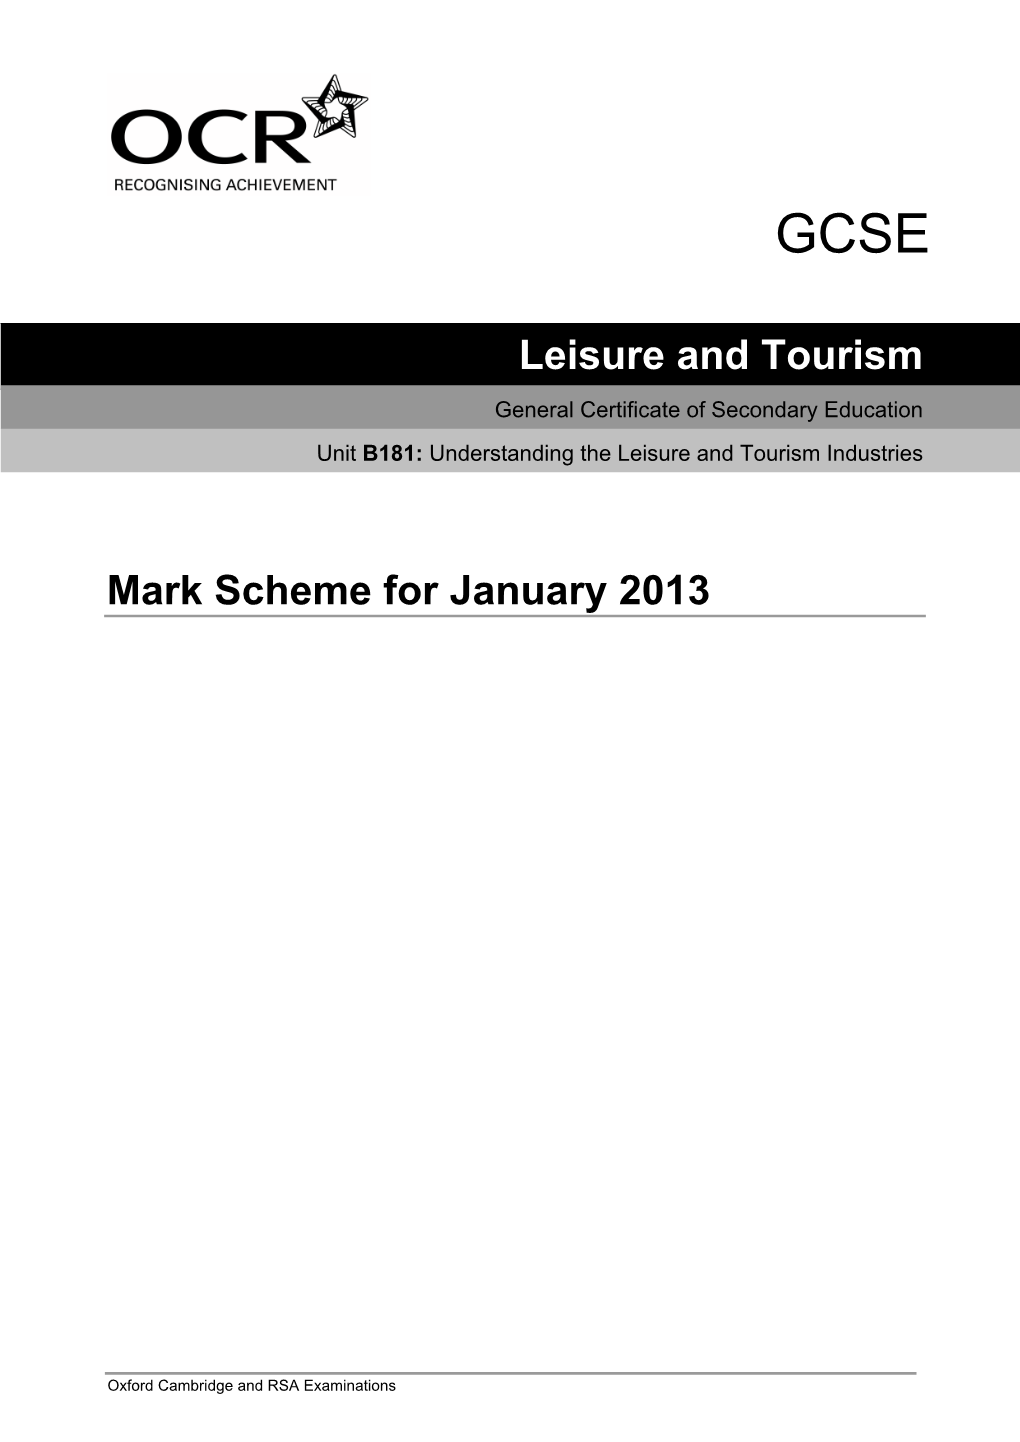 Leisure and Tourism Mark Scheme for January 2013